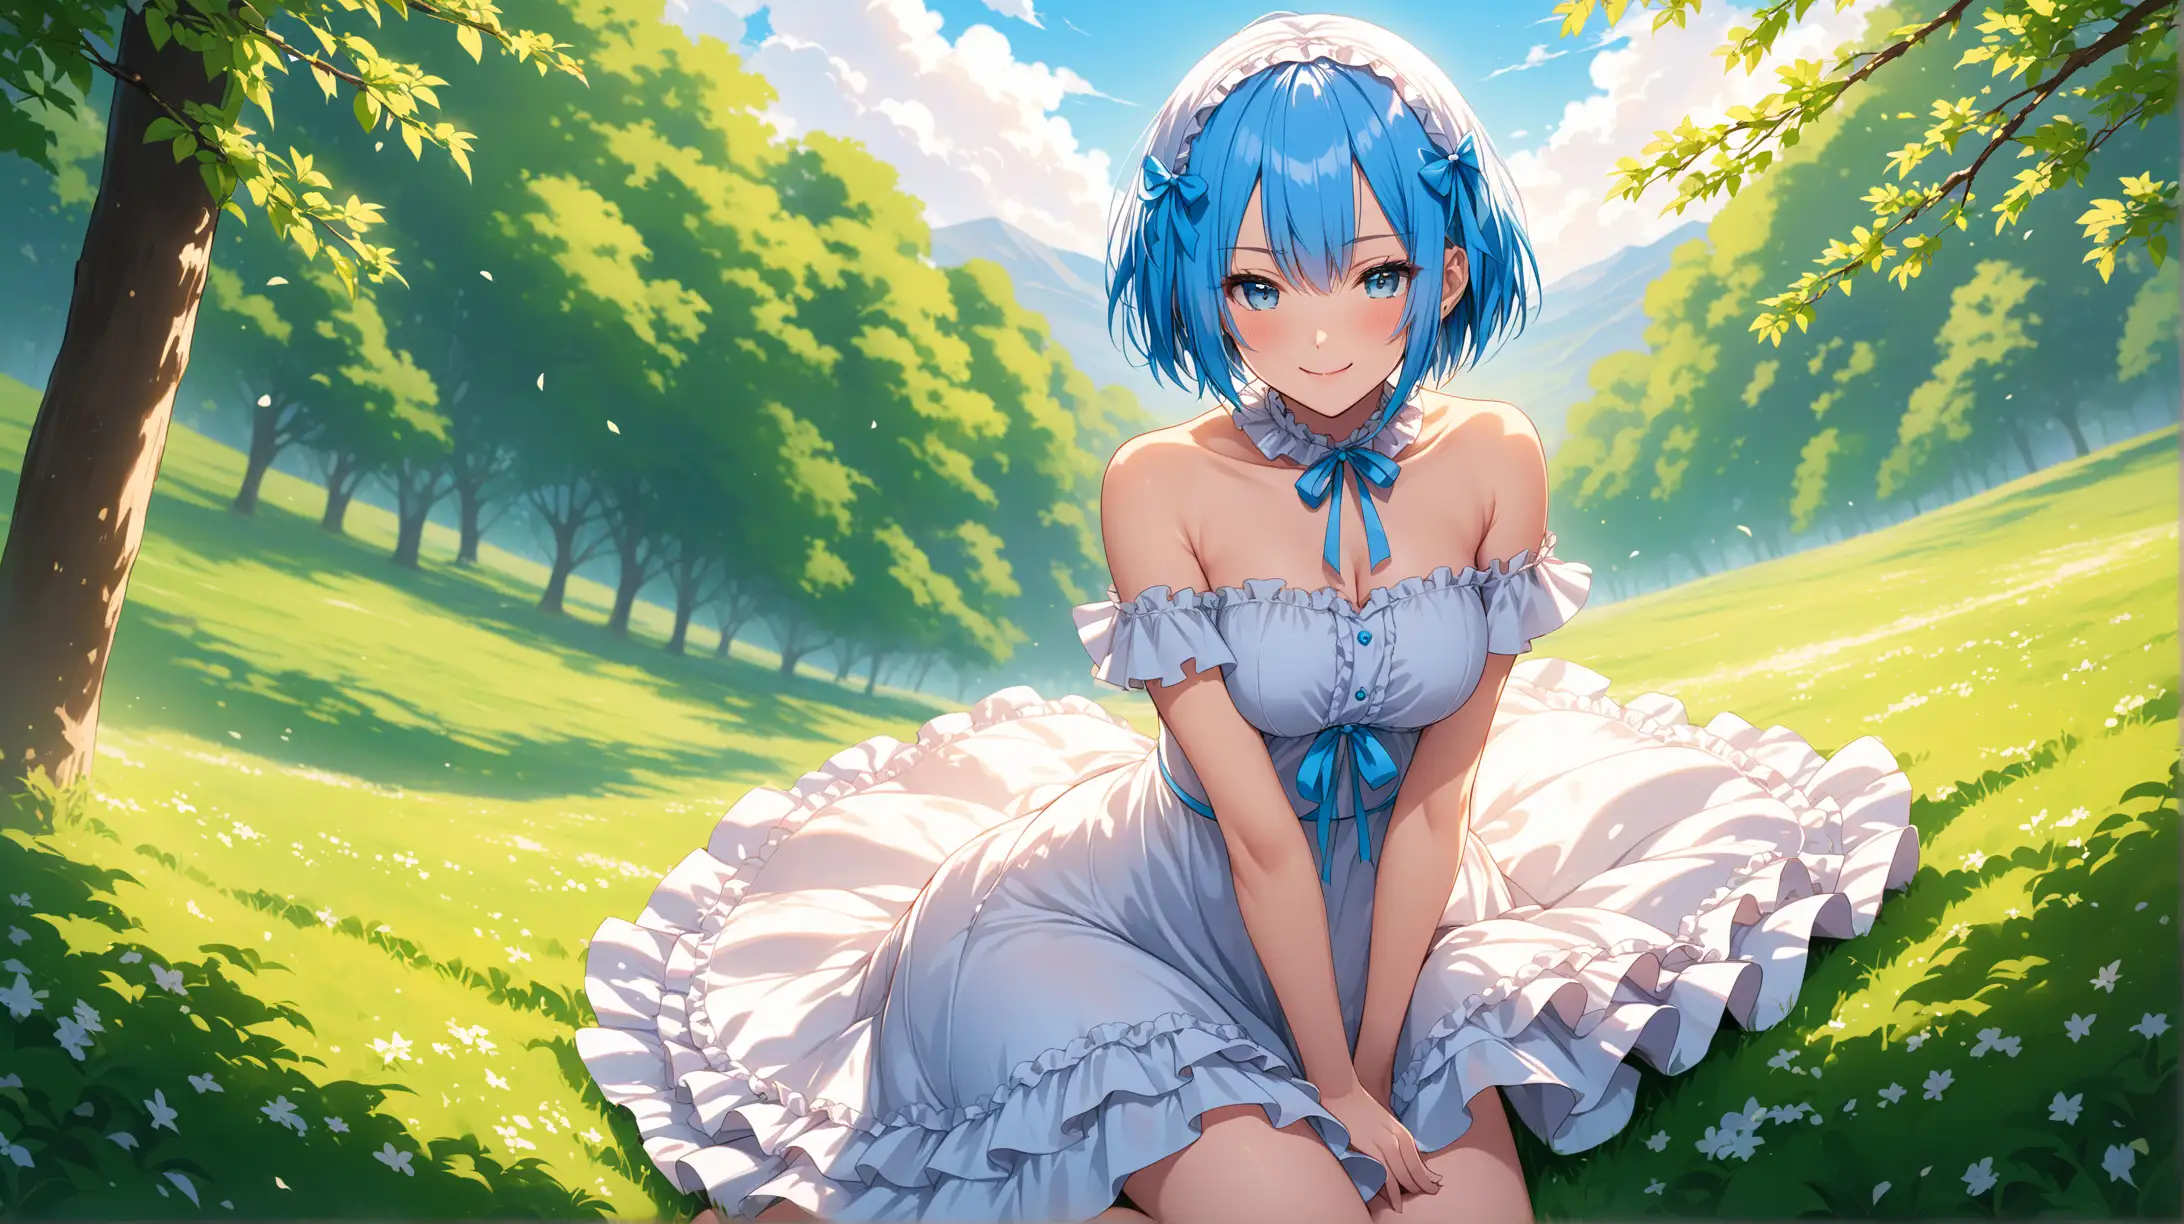 Draw the character Rem, high quality, natural lighting, long shot, outdoors, seductive pose, frilly spring dress, smiling at the viewer